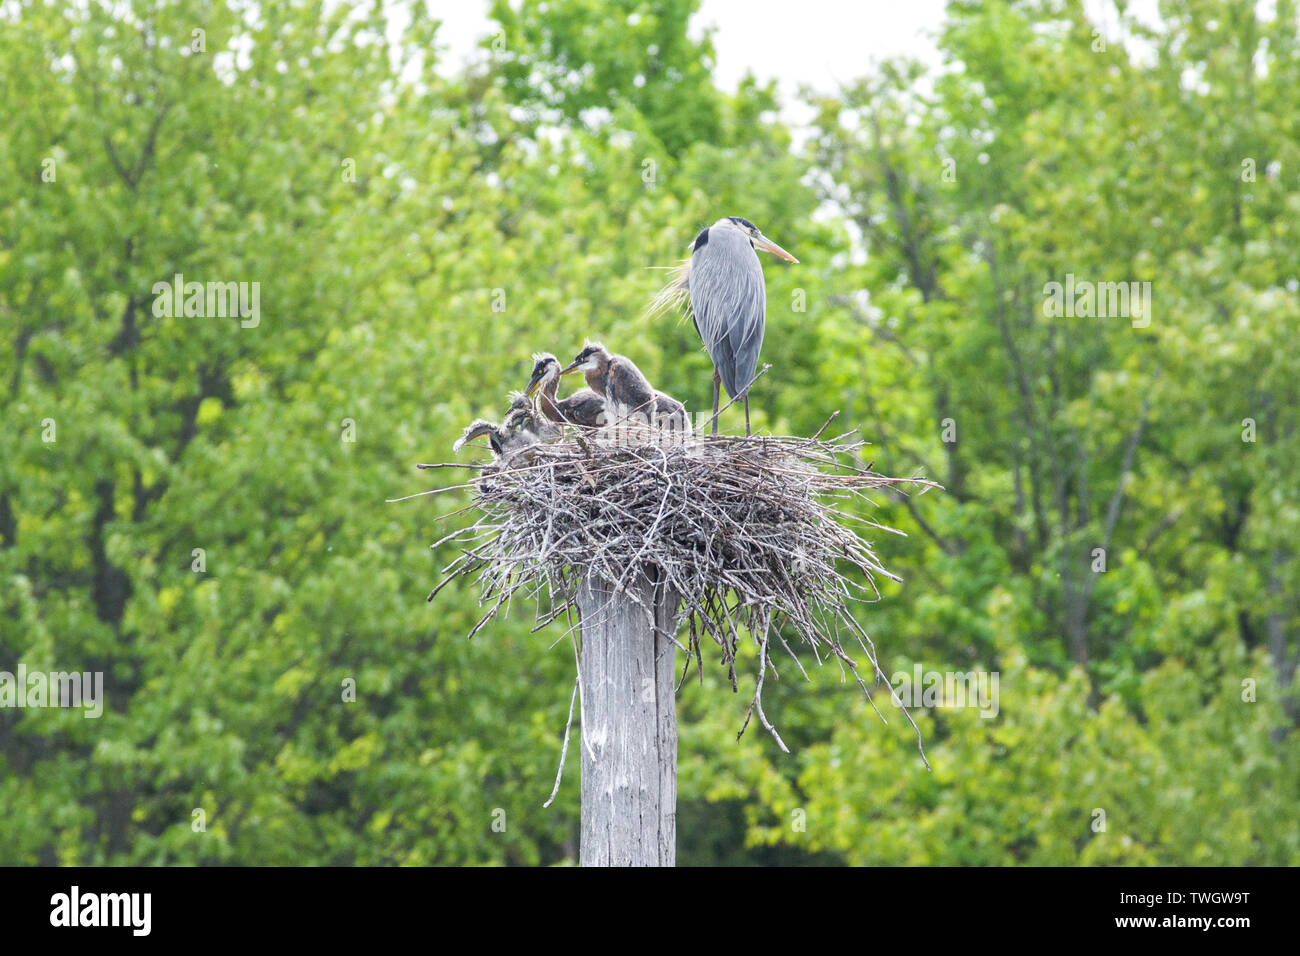 A great blue heron (Ardea herodias) nest with active siblicide as the parent looks away. Stock Photo